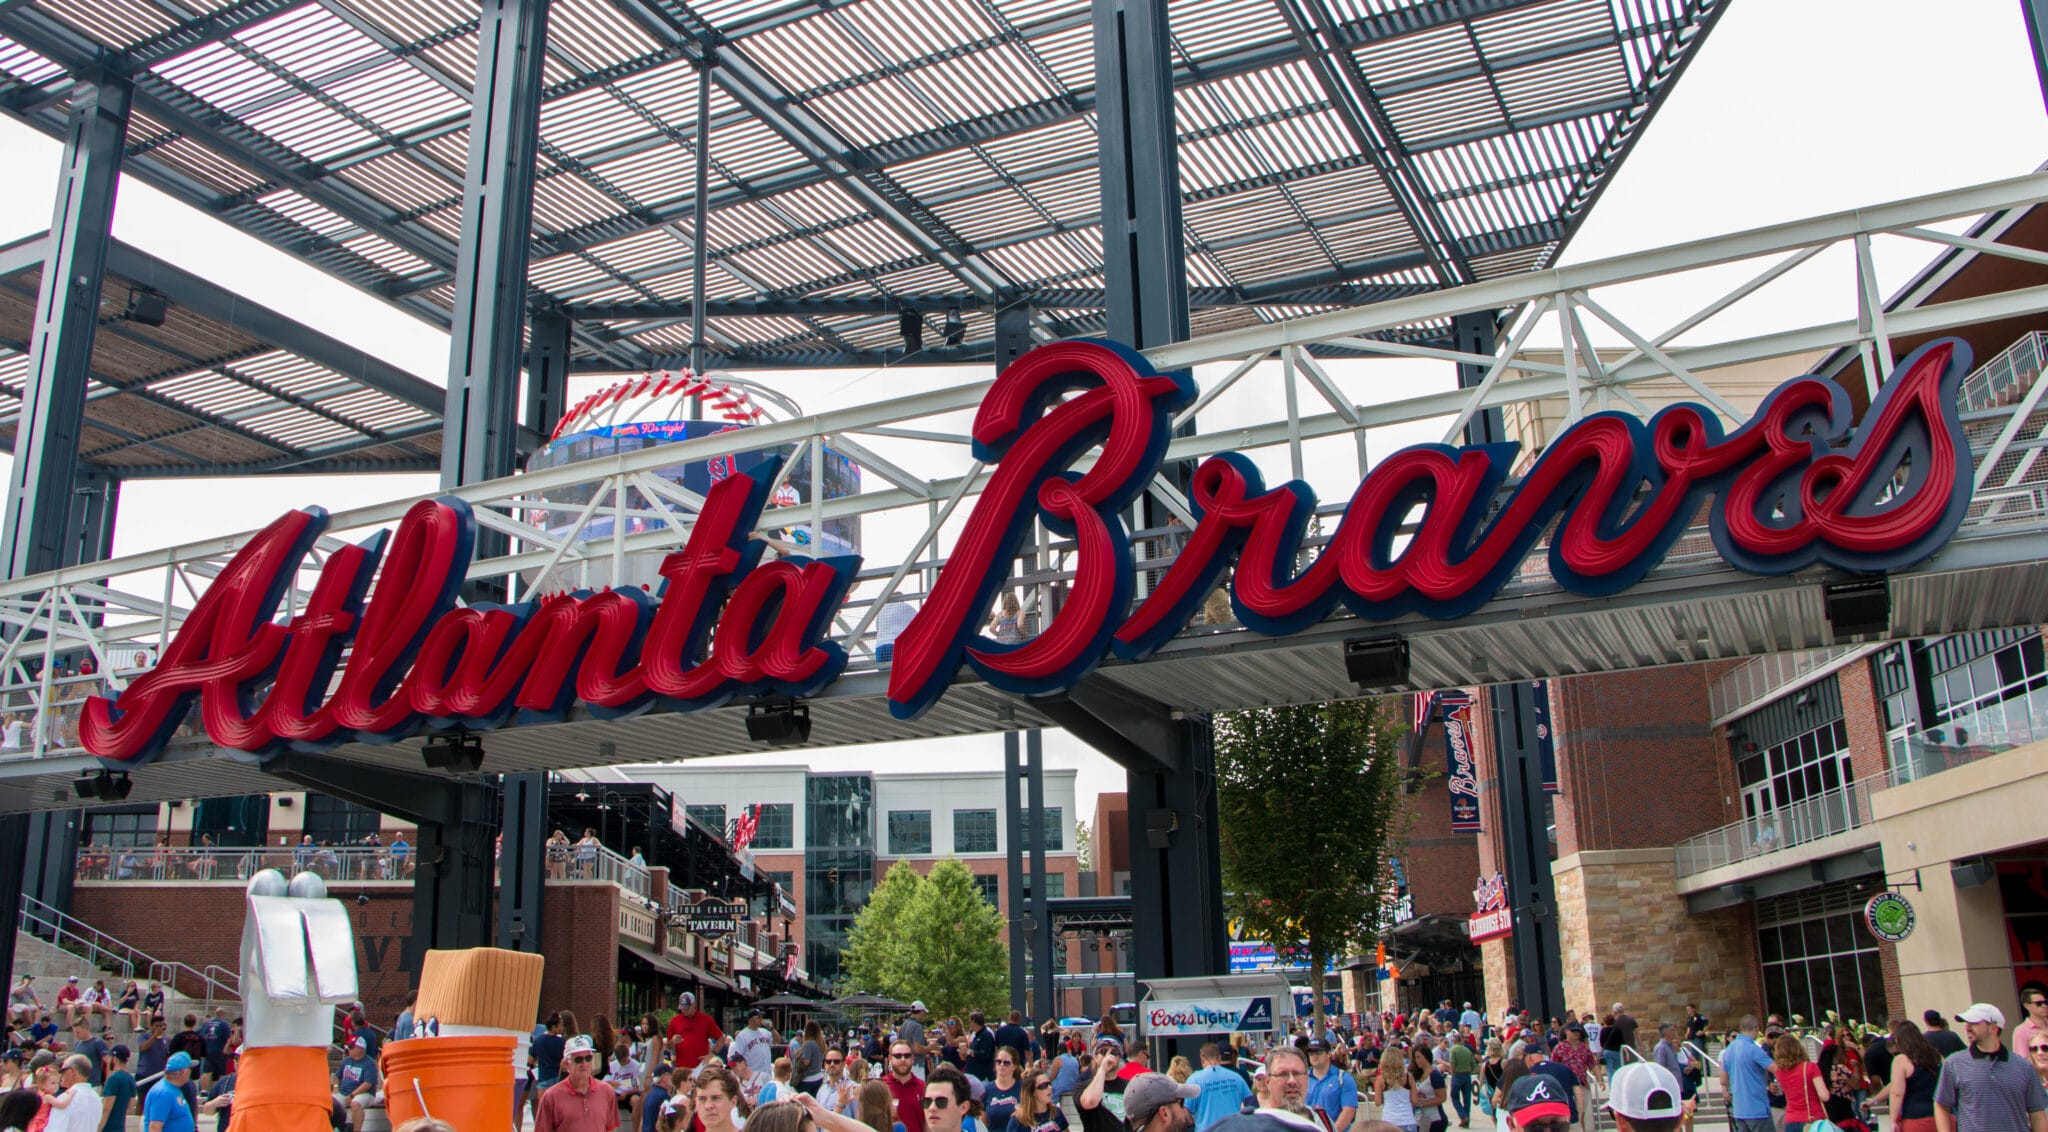 Braves fans react to World Series berth